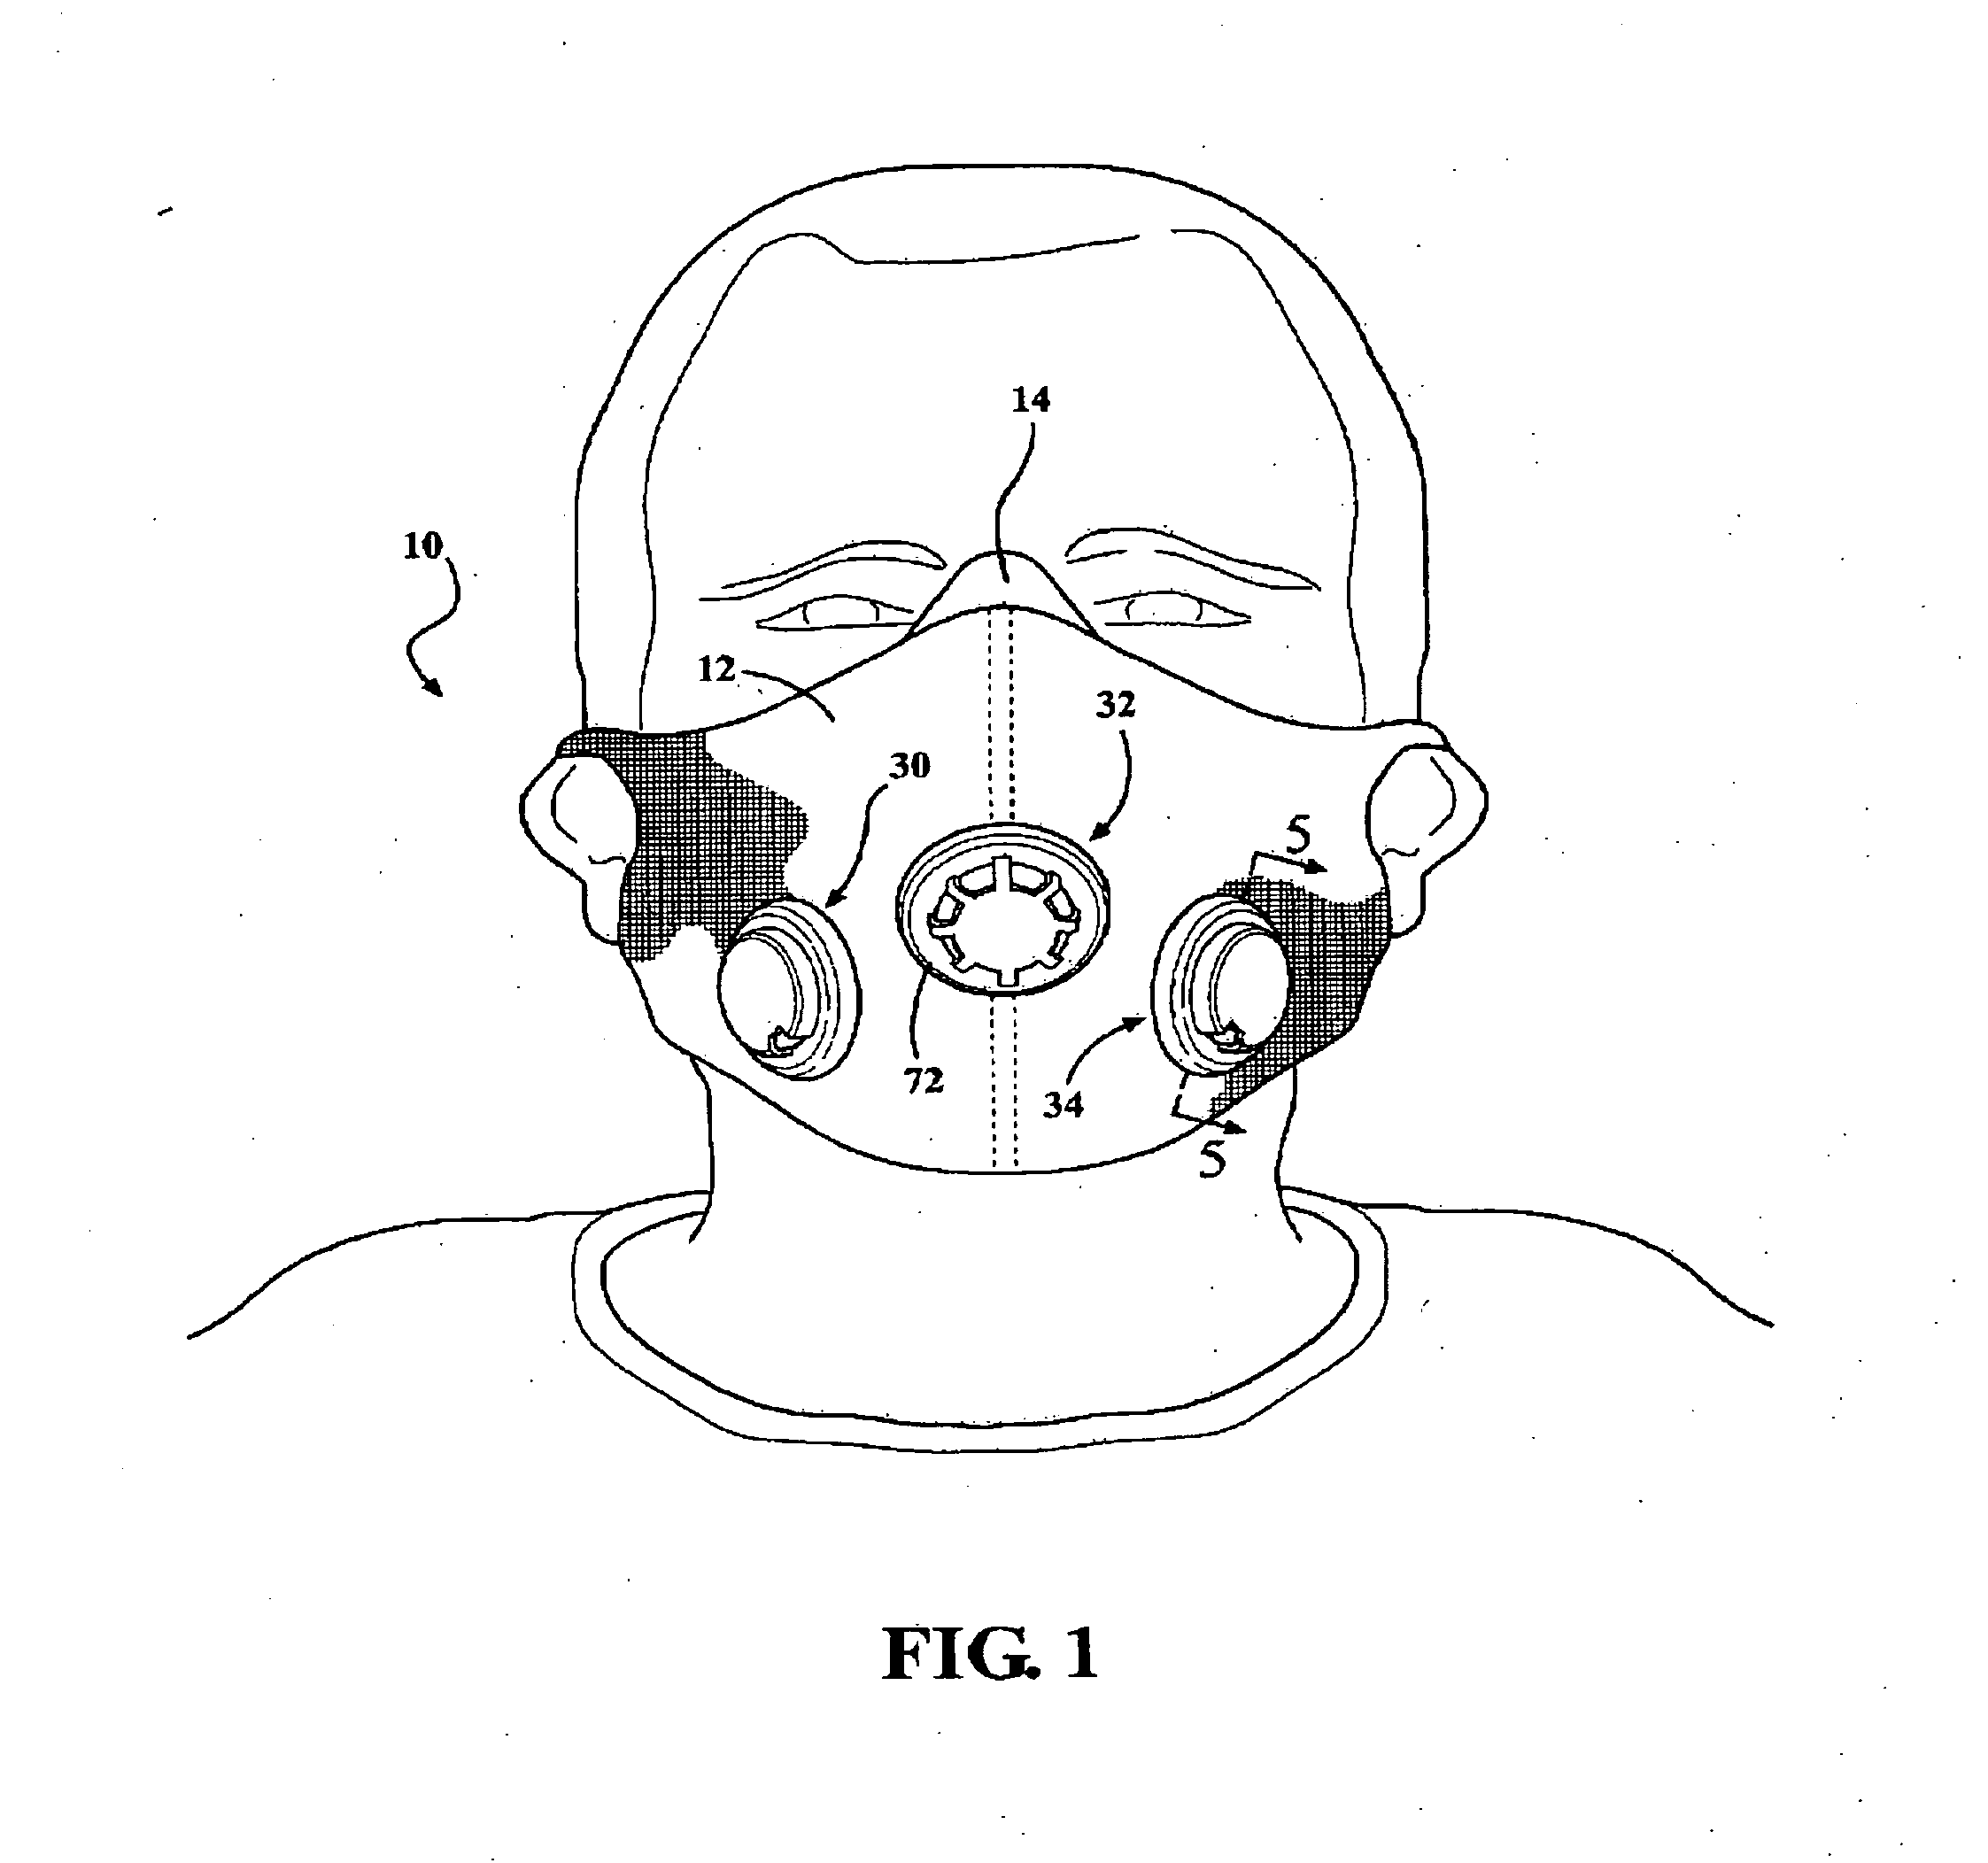 High performance ventilatory training mask incorporating multiple and adjustable air admittance valves for replicating various encountered altitude resistances